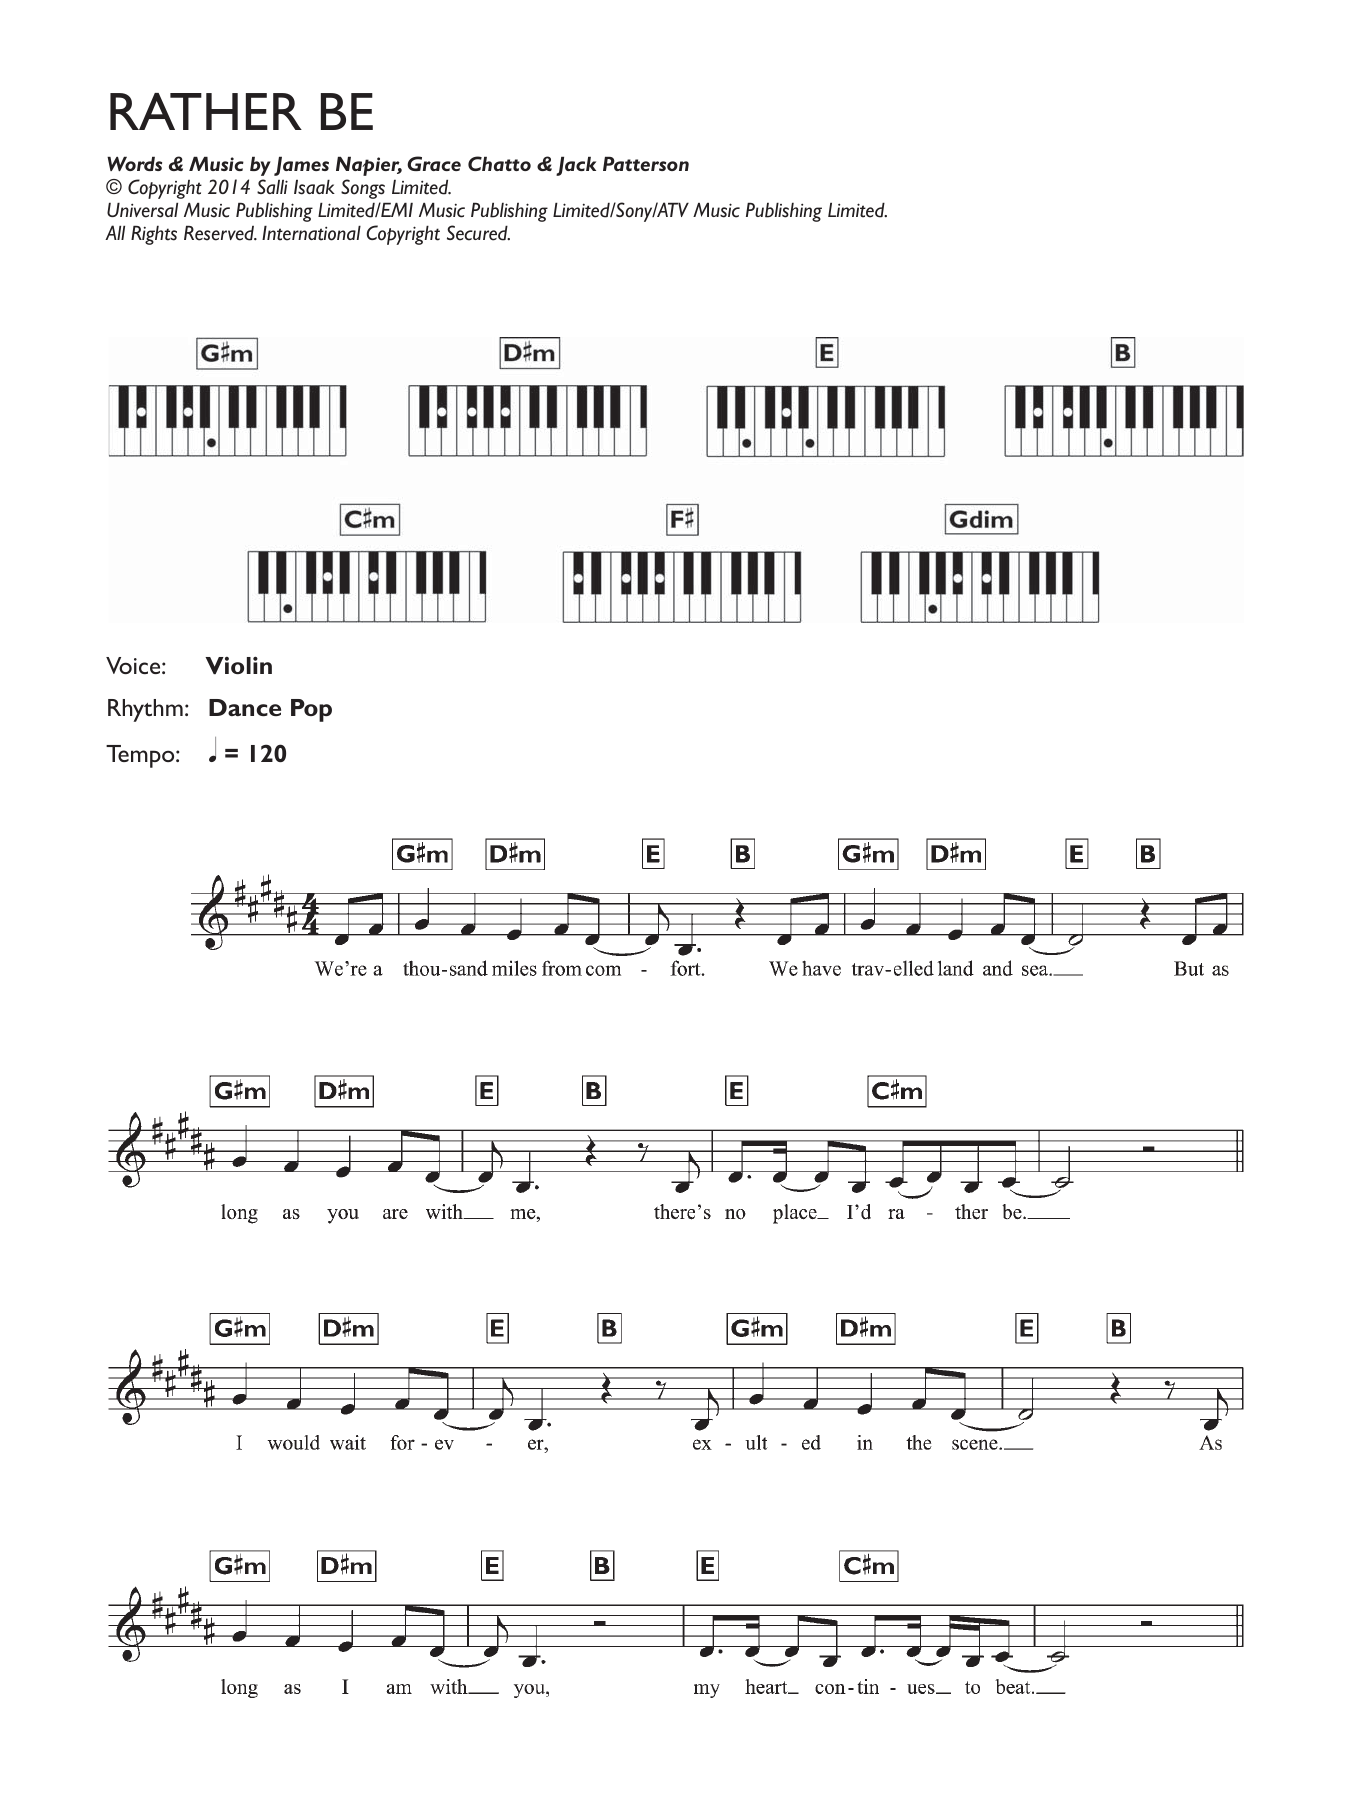 Download Clean Bandit Rather Be (feat. Jess Glynne) Sheet Music